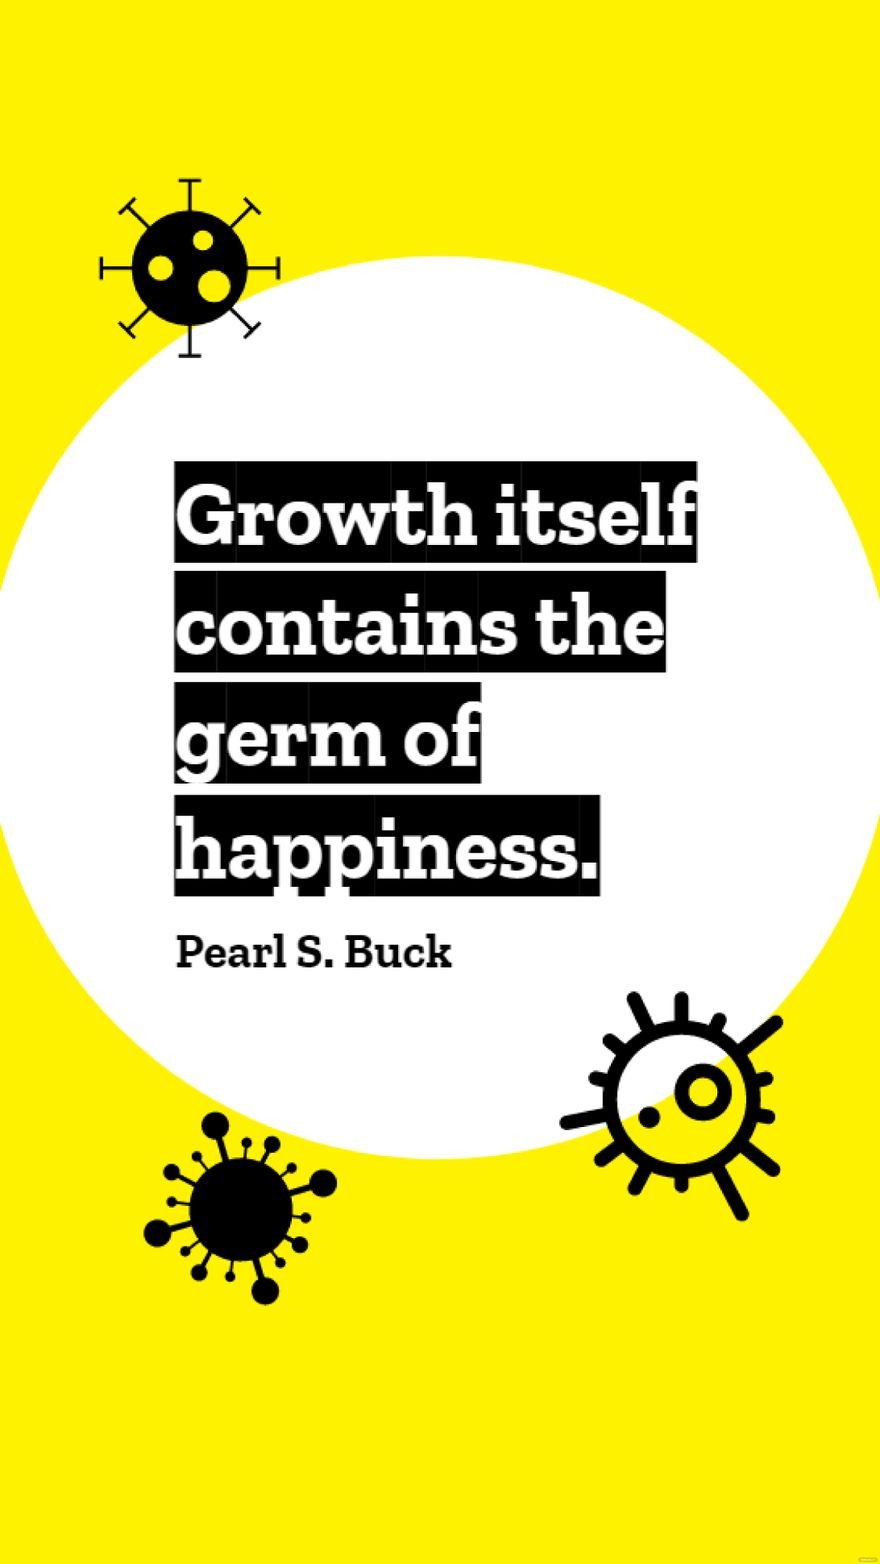 Free Pearl S. Buck - Growth itself contains the germ of happiness. in JPG